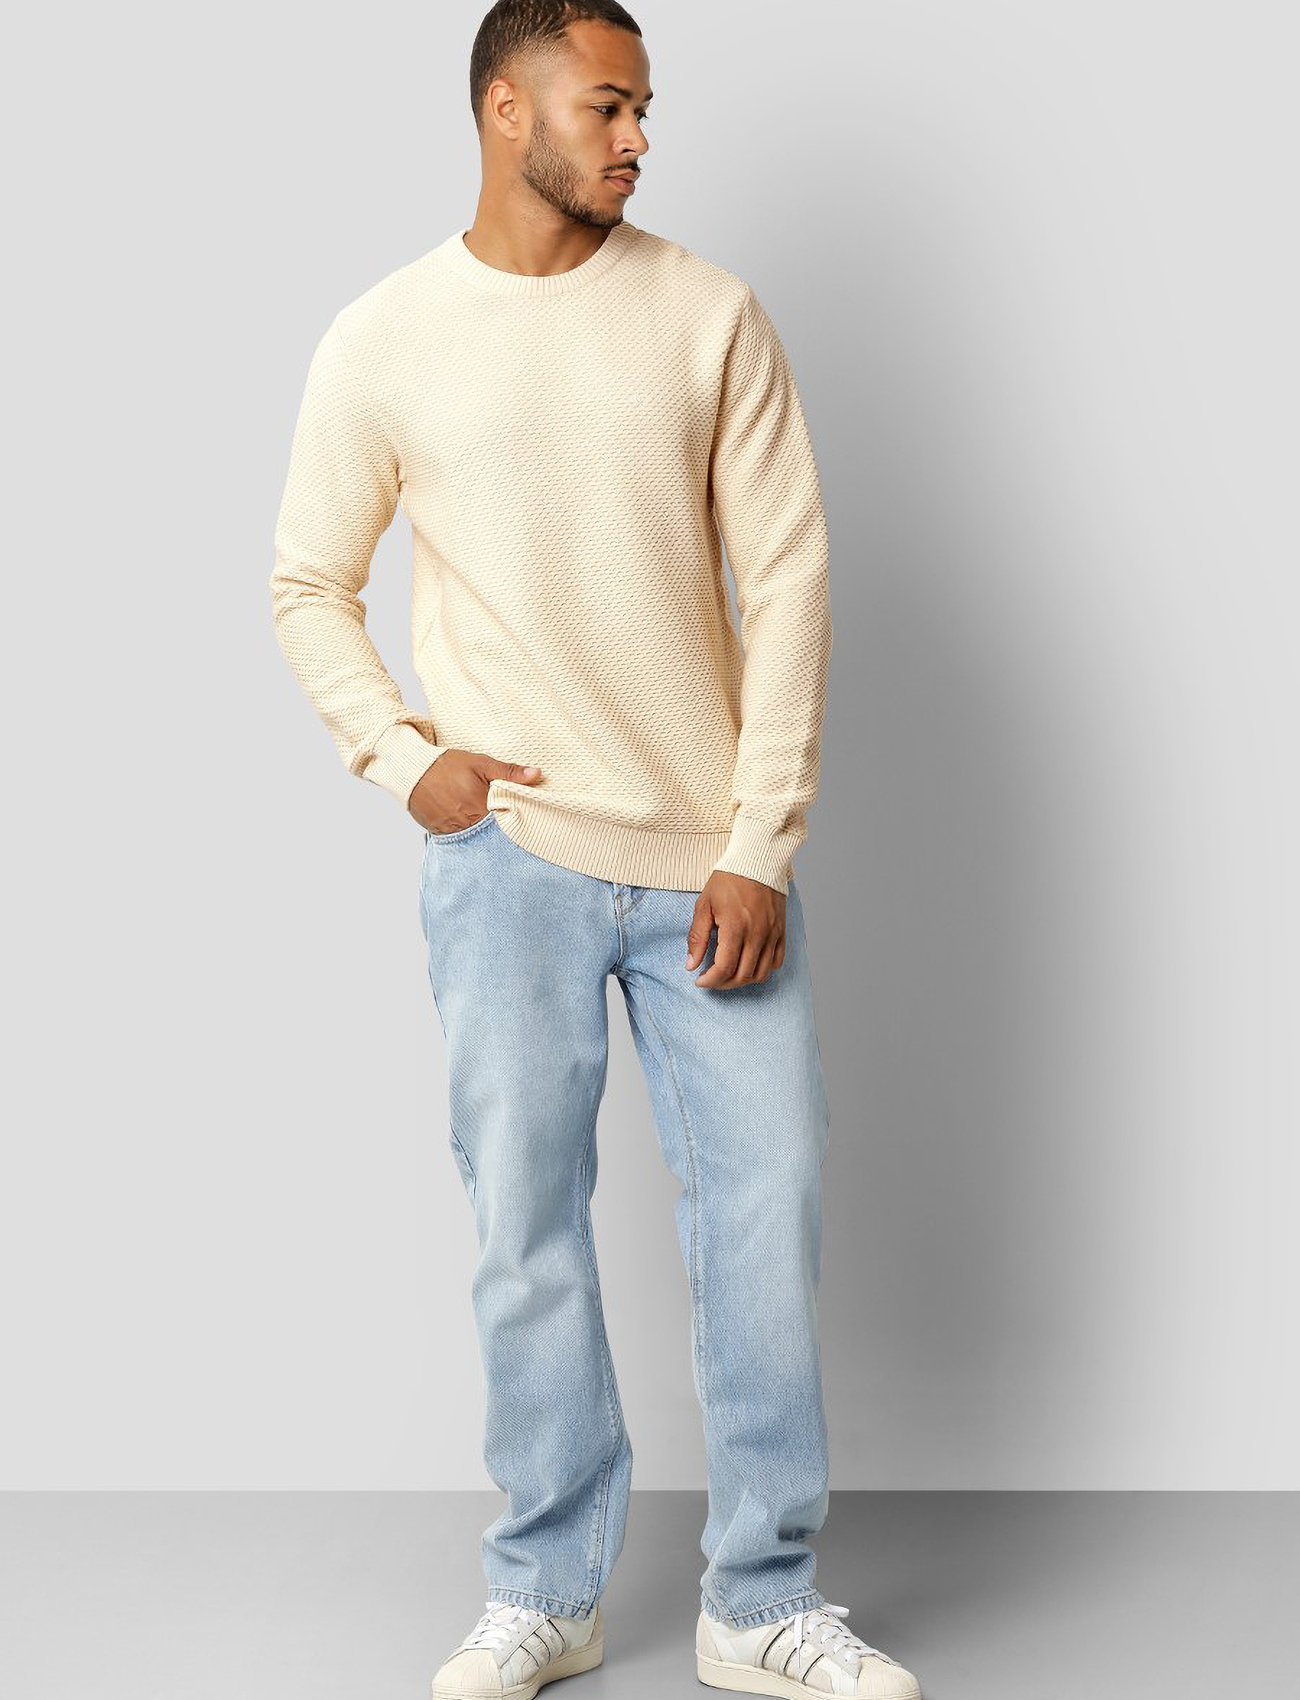 Clean Cut Copenhagen - Oliver Recycled O-neck Knit - knitted round necks - sand - 1